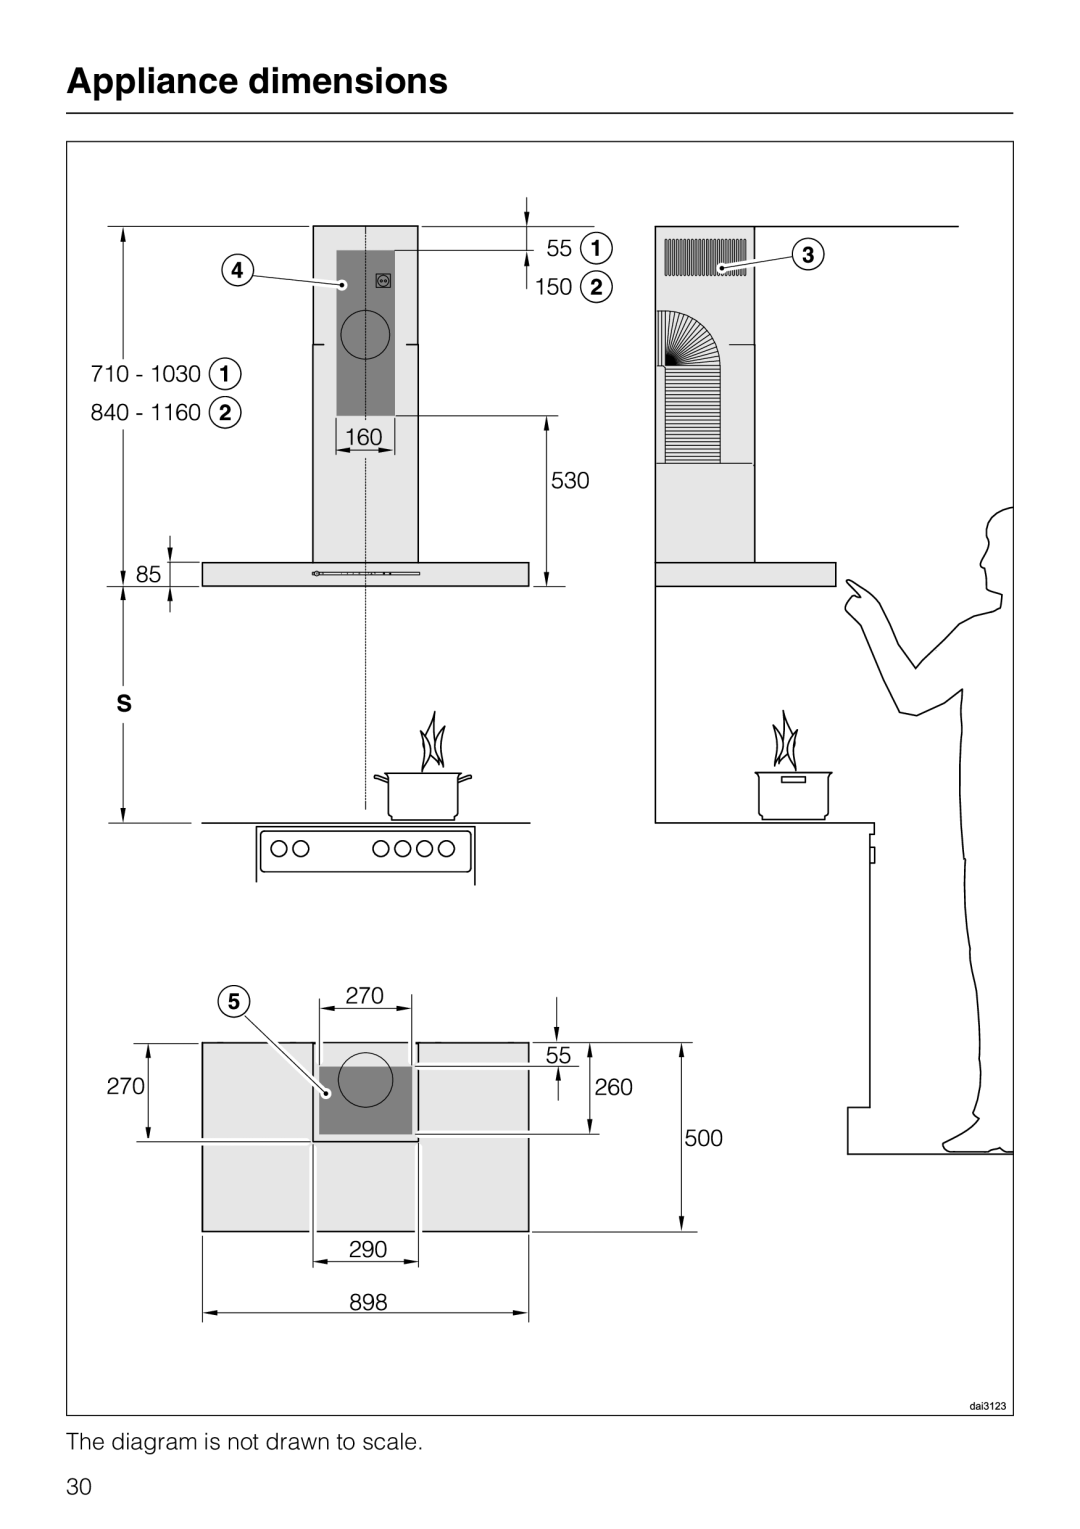 Miele 09 730 840 installation instructions Appliance dimensions, The diagram is not drawn to scale 